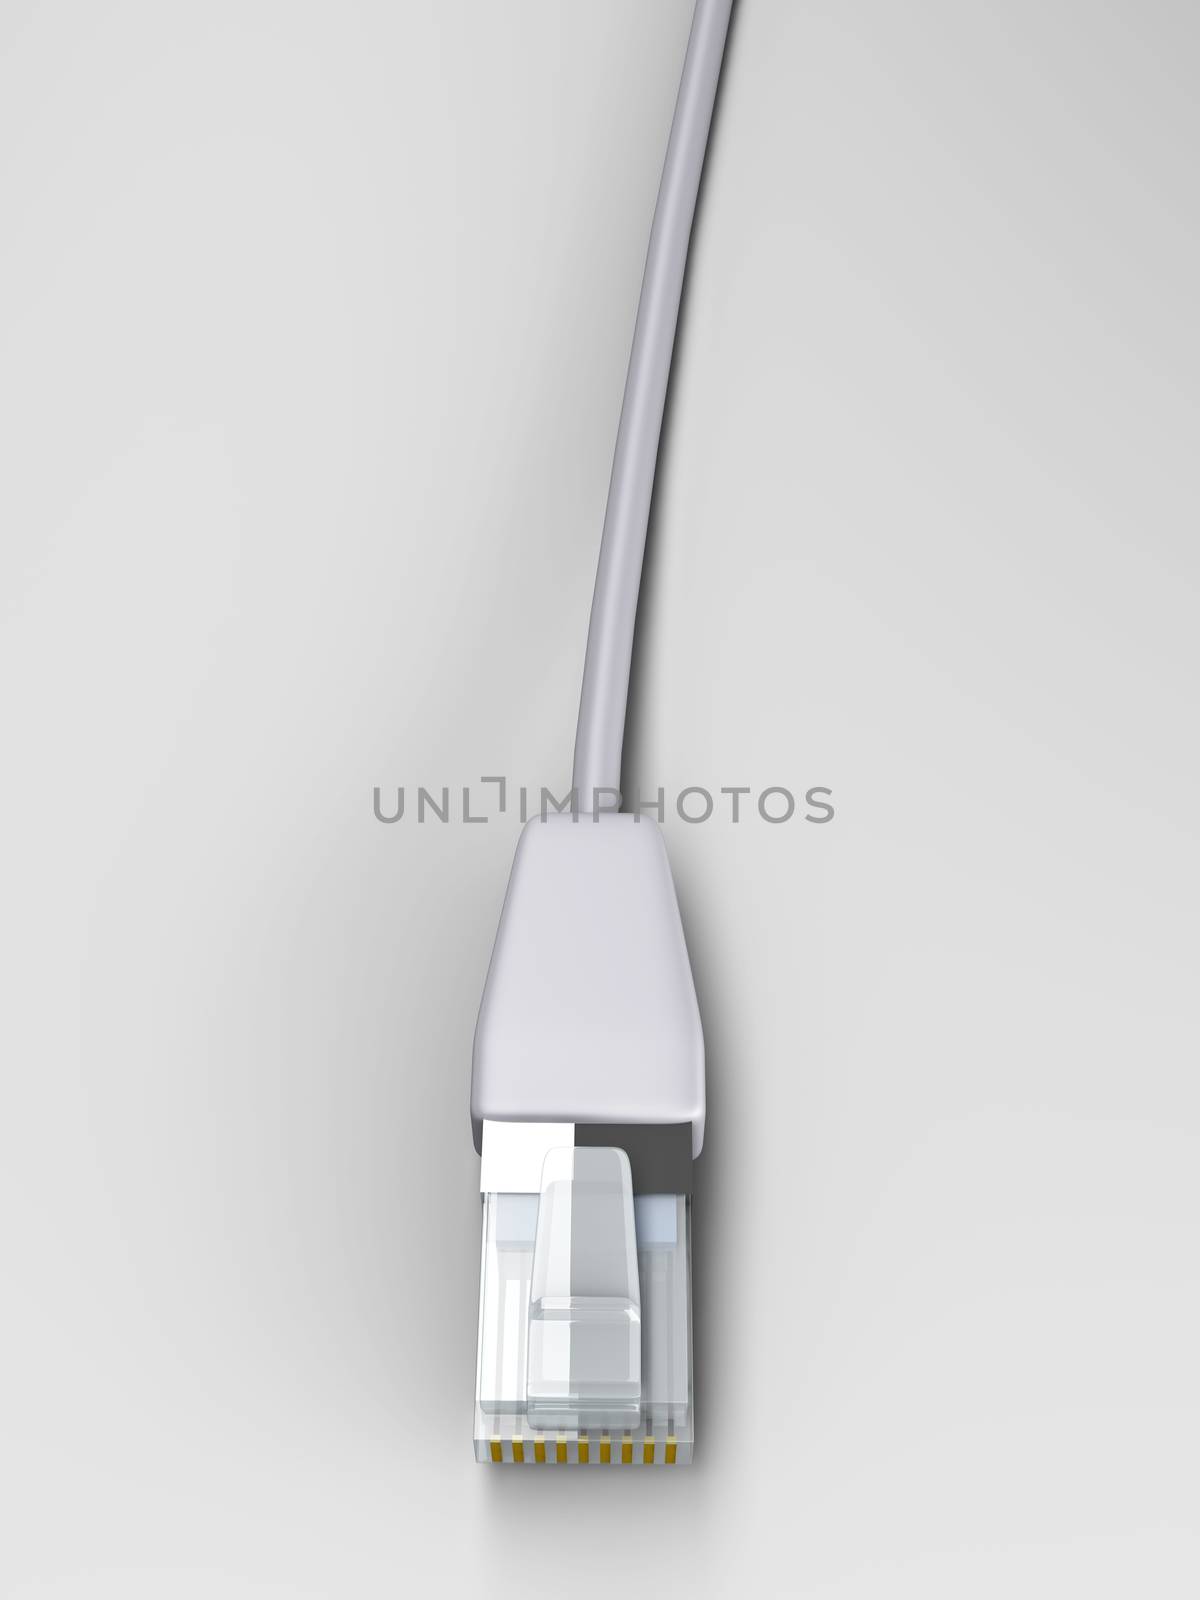 LAN Cable by Spectral